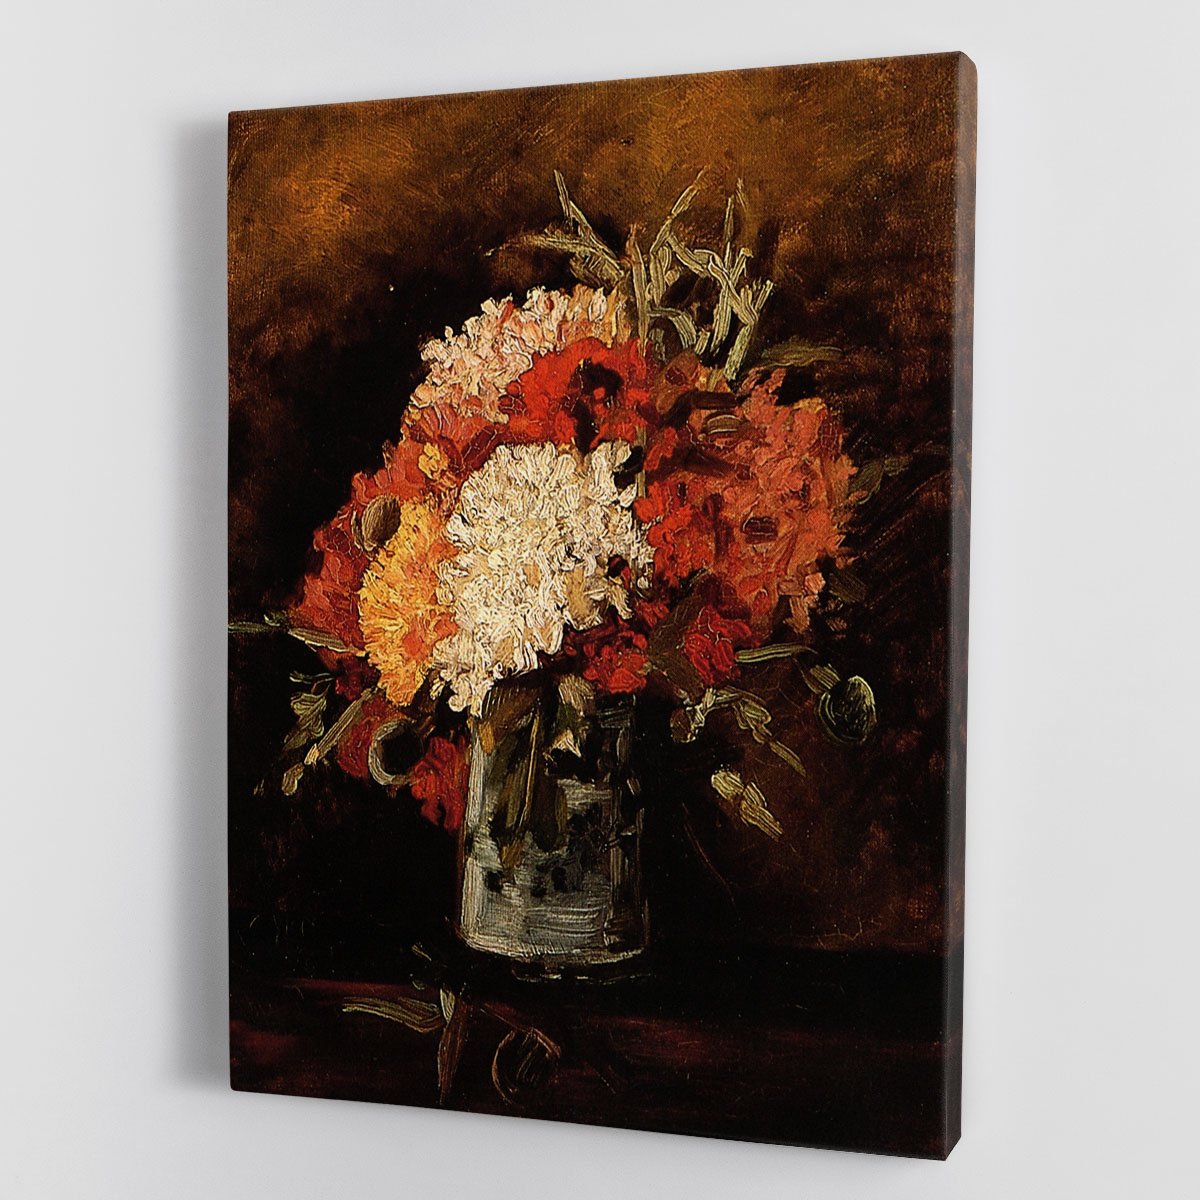 Vase with Carnations by Van Gogh Canvas Print or Poster